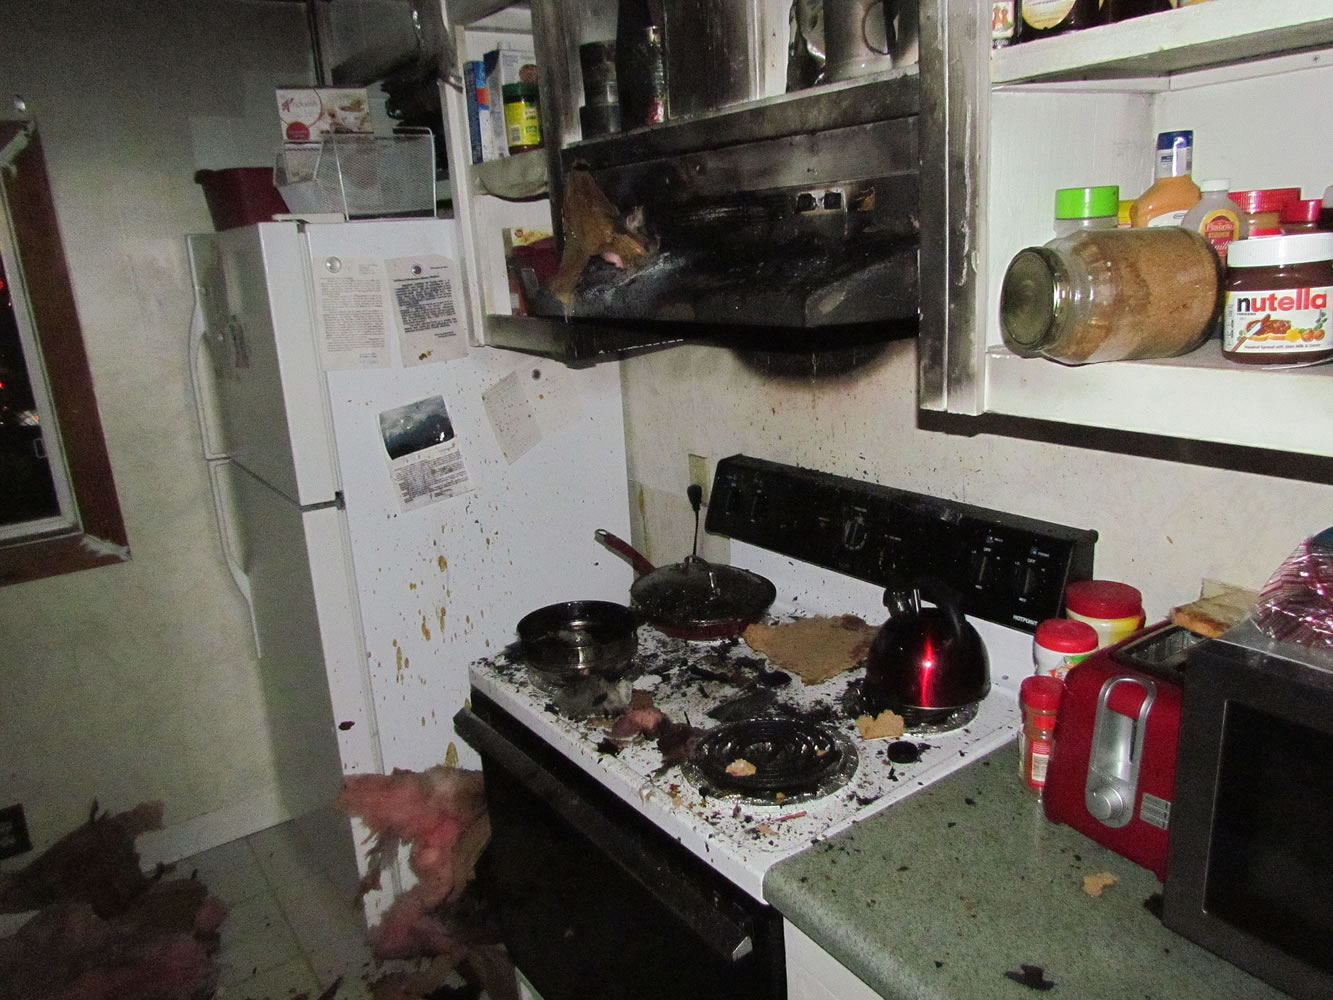 A stovetop fire spread after the occupant tried to use water to put out the flames, causing more than $8,000 in damage to a manufactured home.